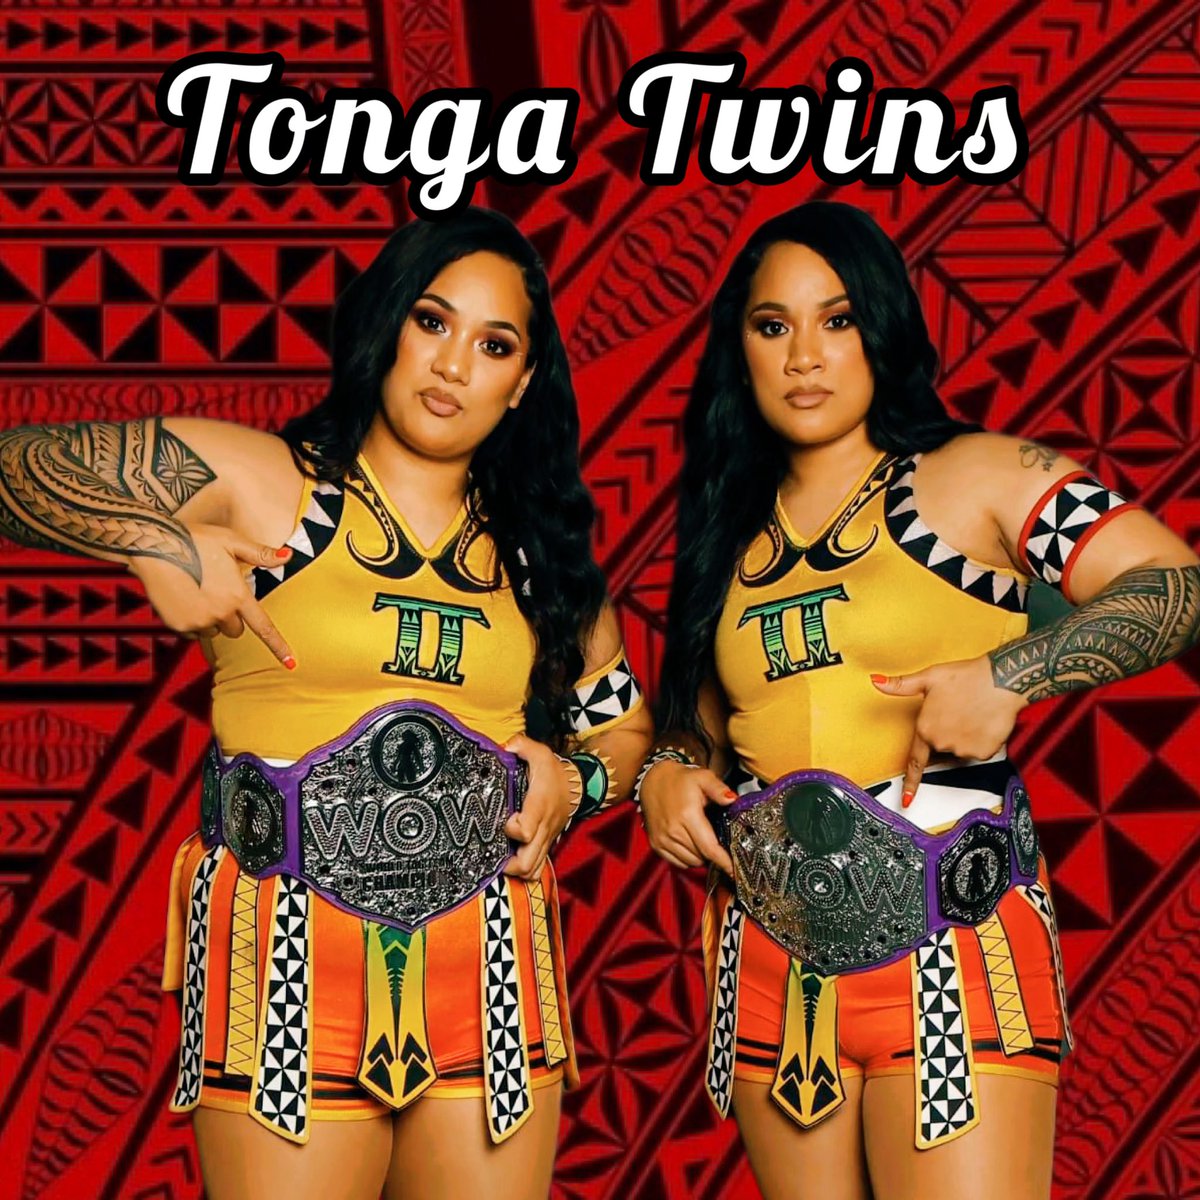 Tribal Queenz 👑👑
Royal Tz 🇹🇴
#culture 
#tagteamchampions 

#tongatwins #tribal #wowsuperheroes #wrestling #twins #explorepage #sister #champs